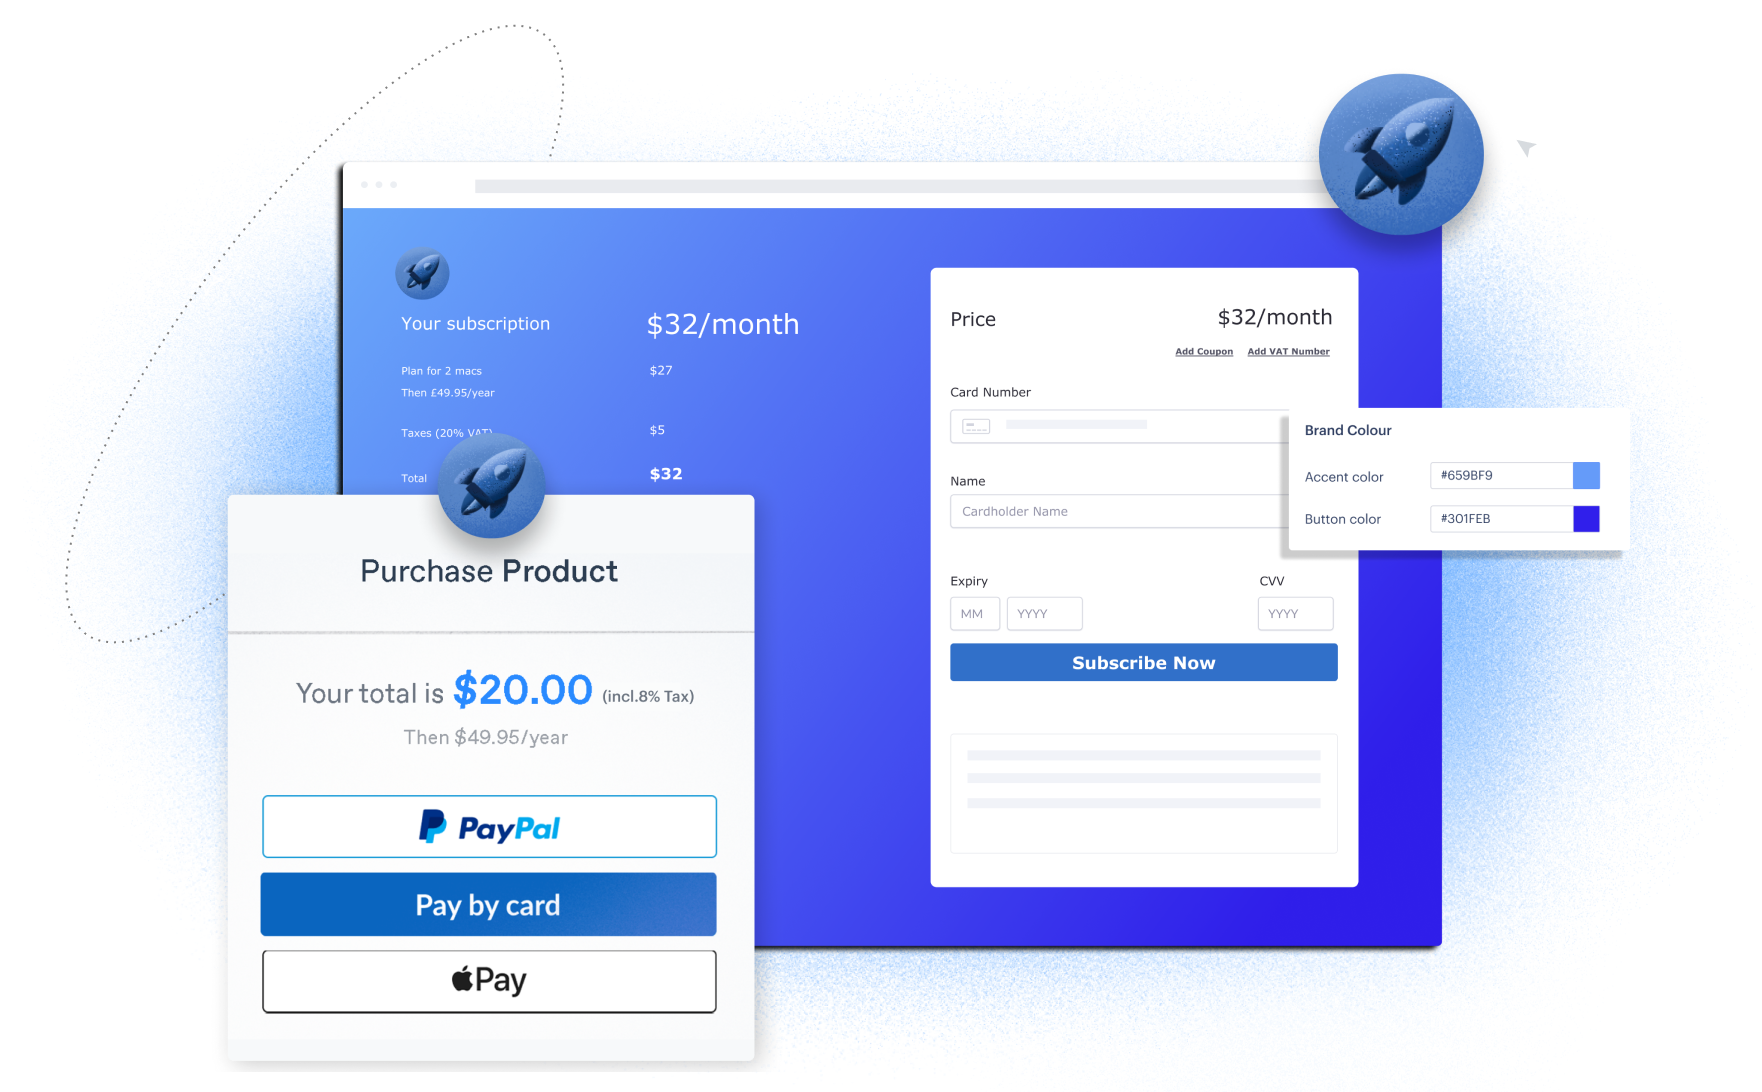 Paddle’s Checkout is flexible and customizable with both overlay and inline options